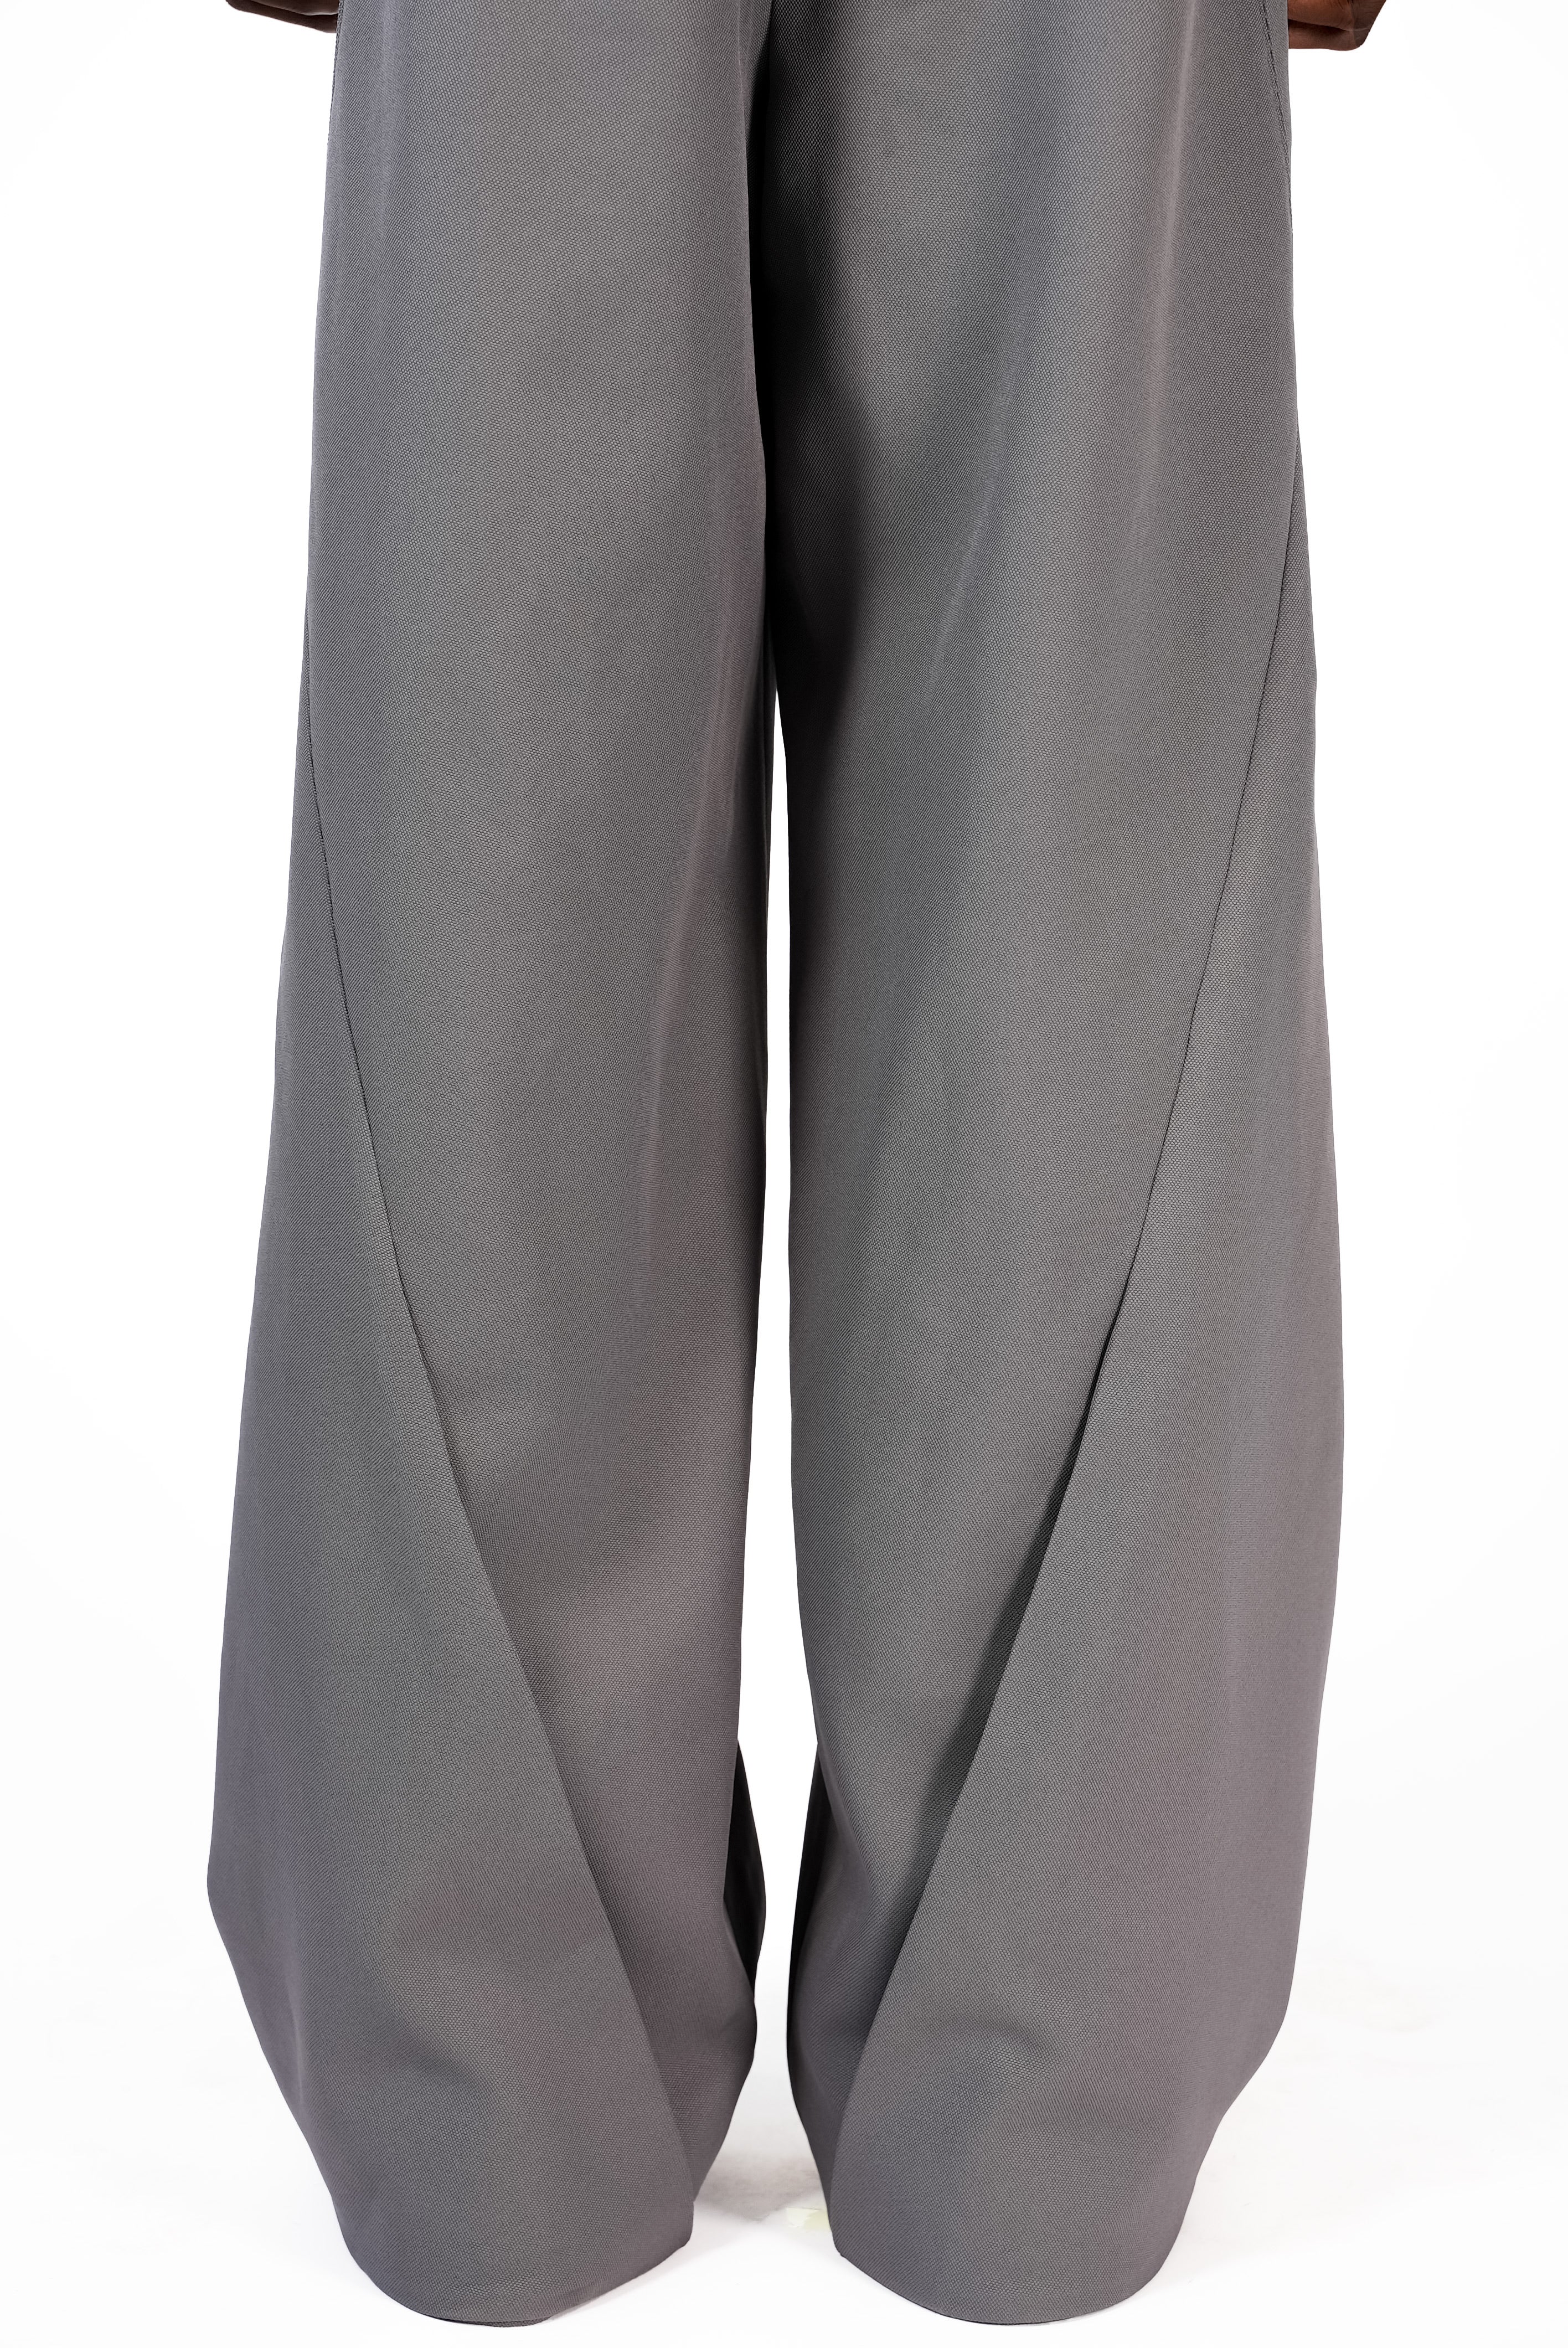 STRONG003 TROUSERS(GRAY) size46 - パンツ